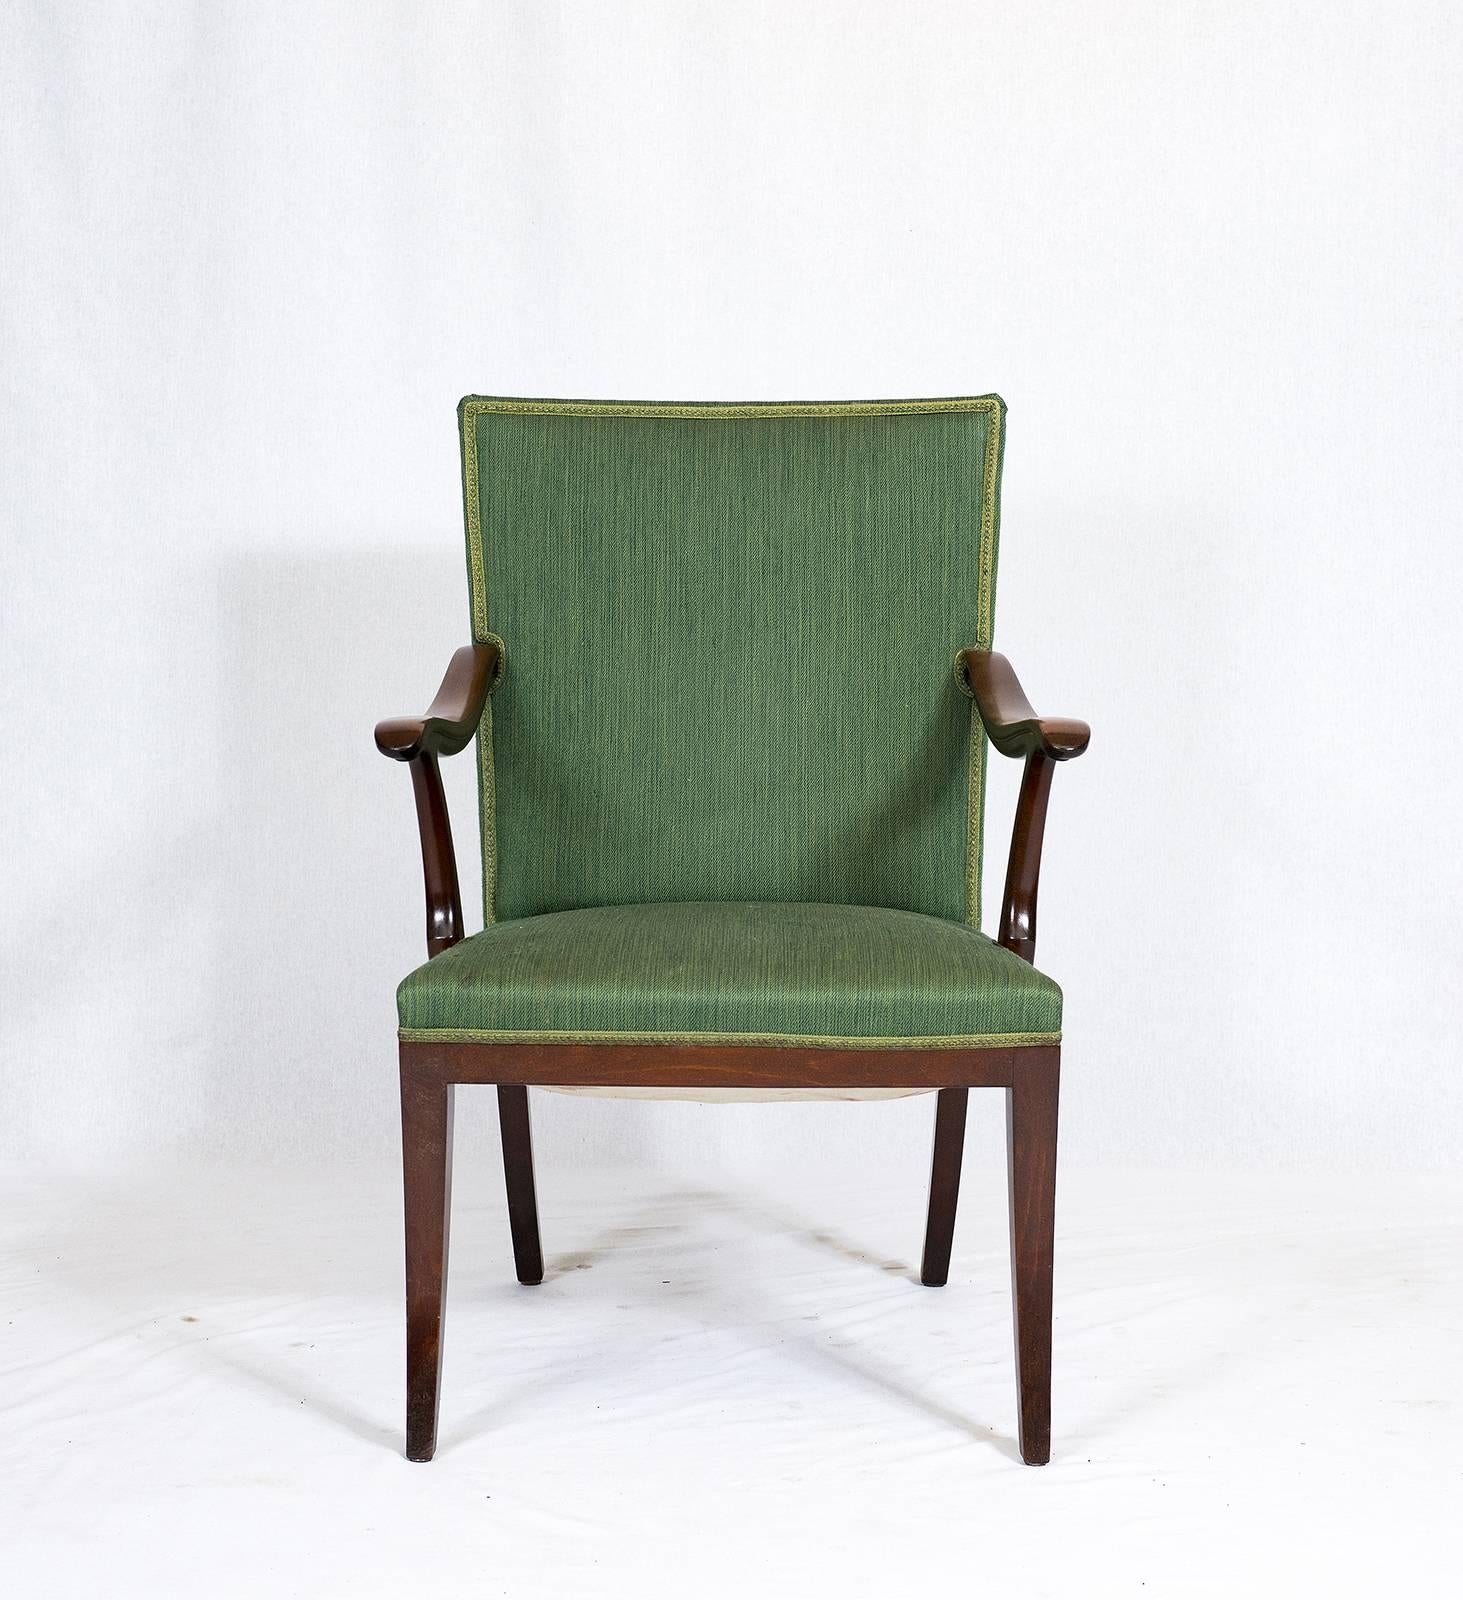 Frits Henningsen lounge chair.   Store formerly known as ARTFUL DODGER INC